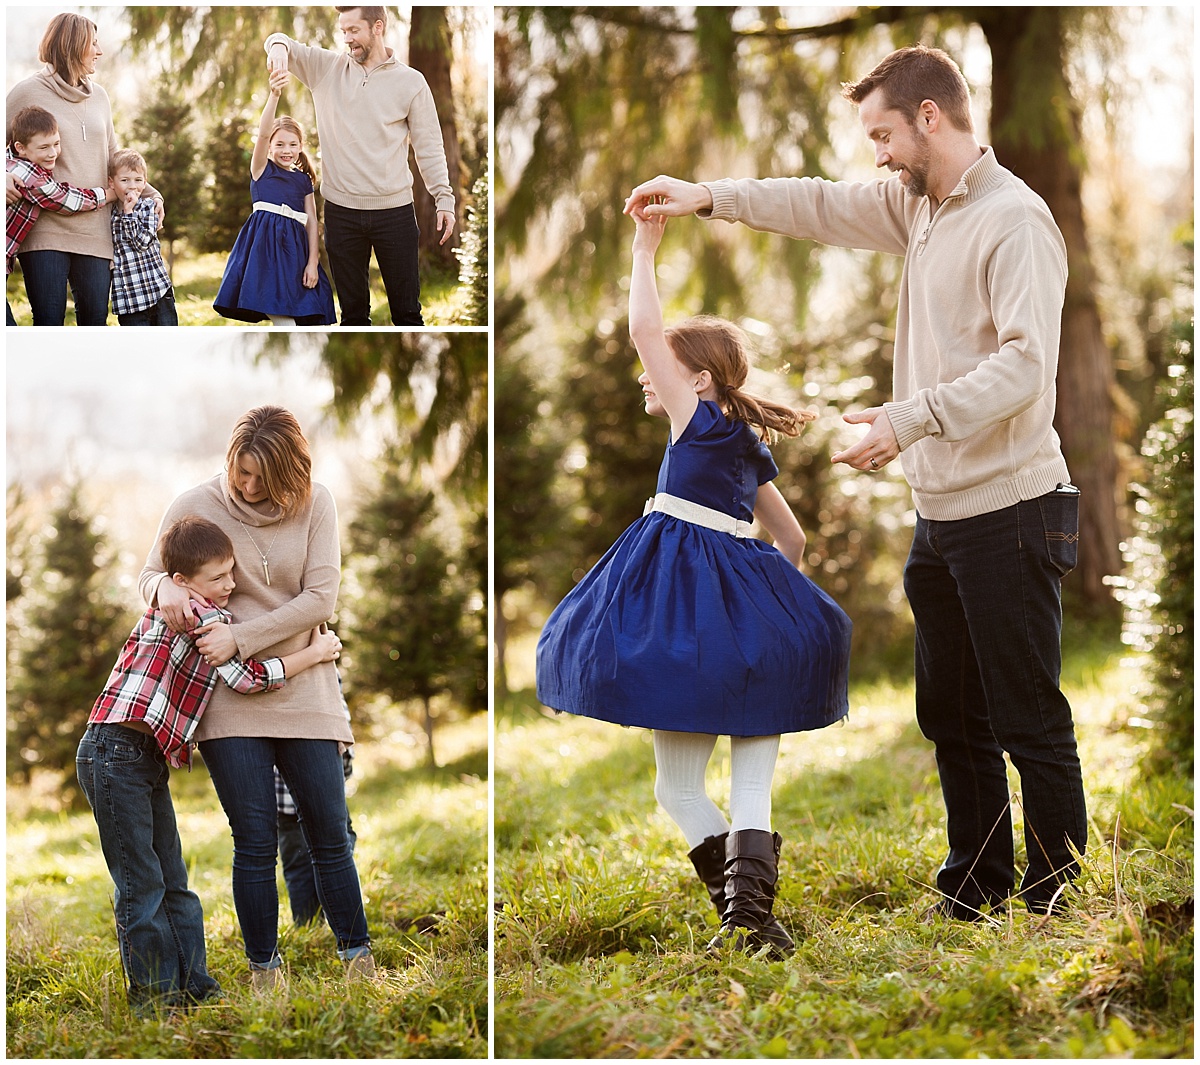 Family Photos at a Christmas Tree farm, Neyssa Lee Photography, Snoqualmie Photographer, Seattle Family Photography, dancing with dad, Carnation Tree Farm